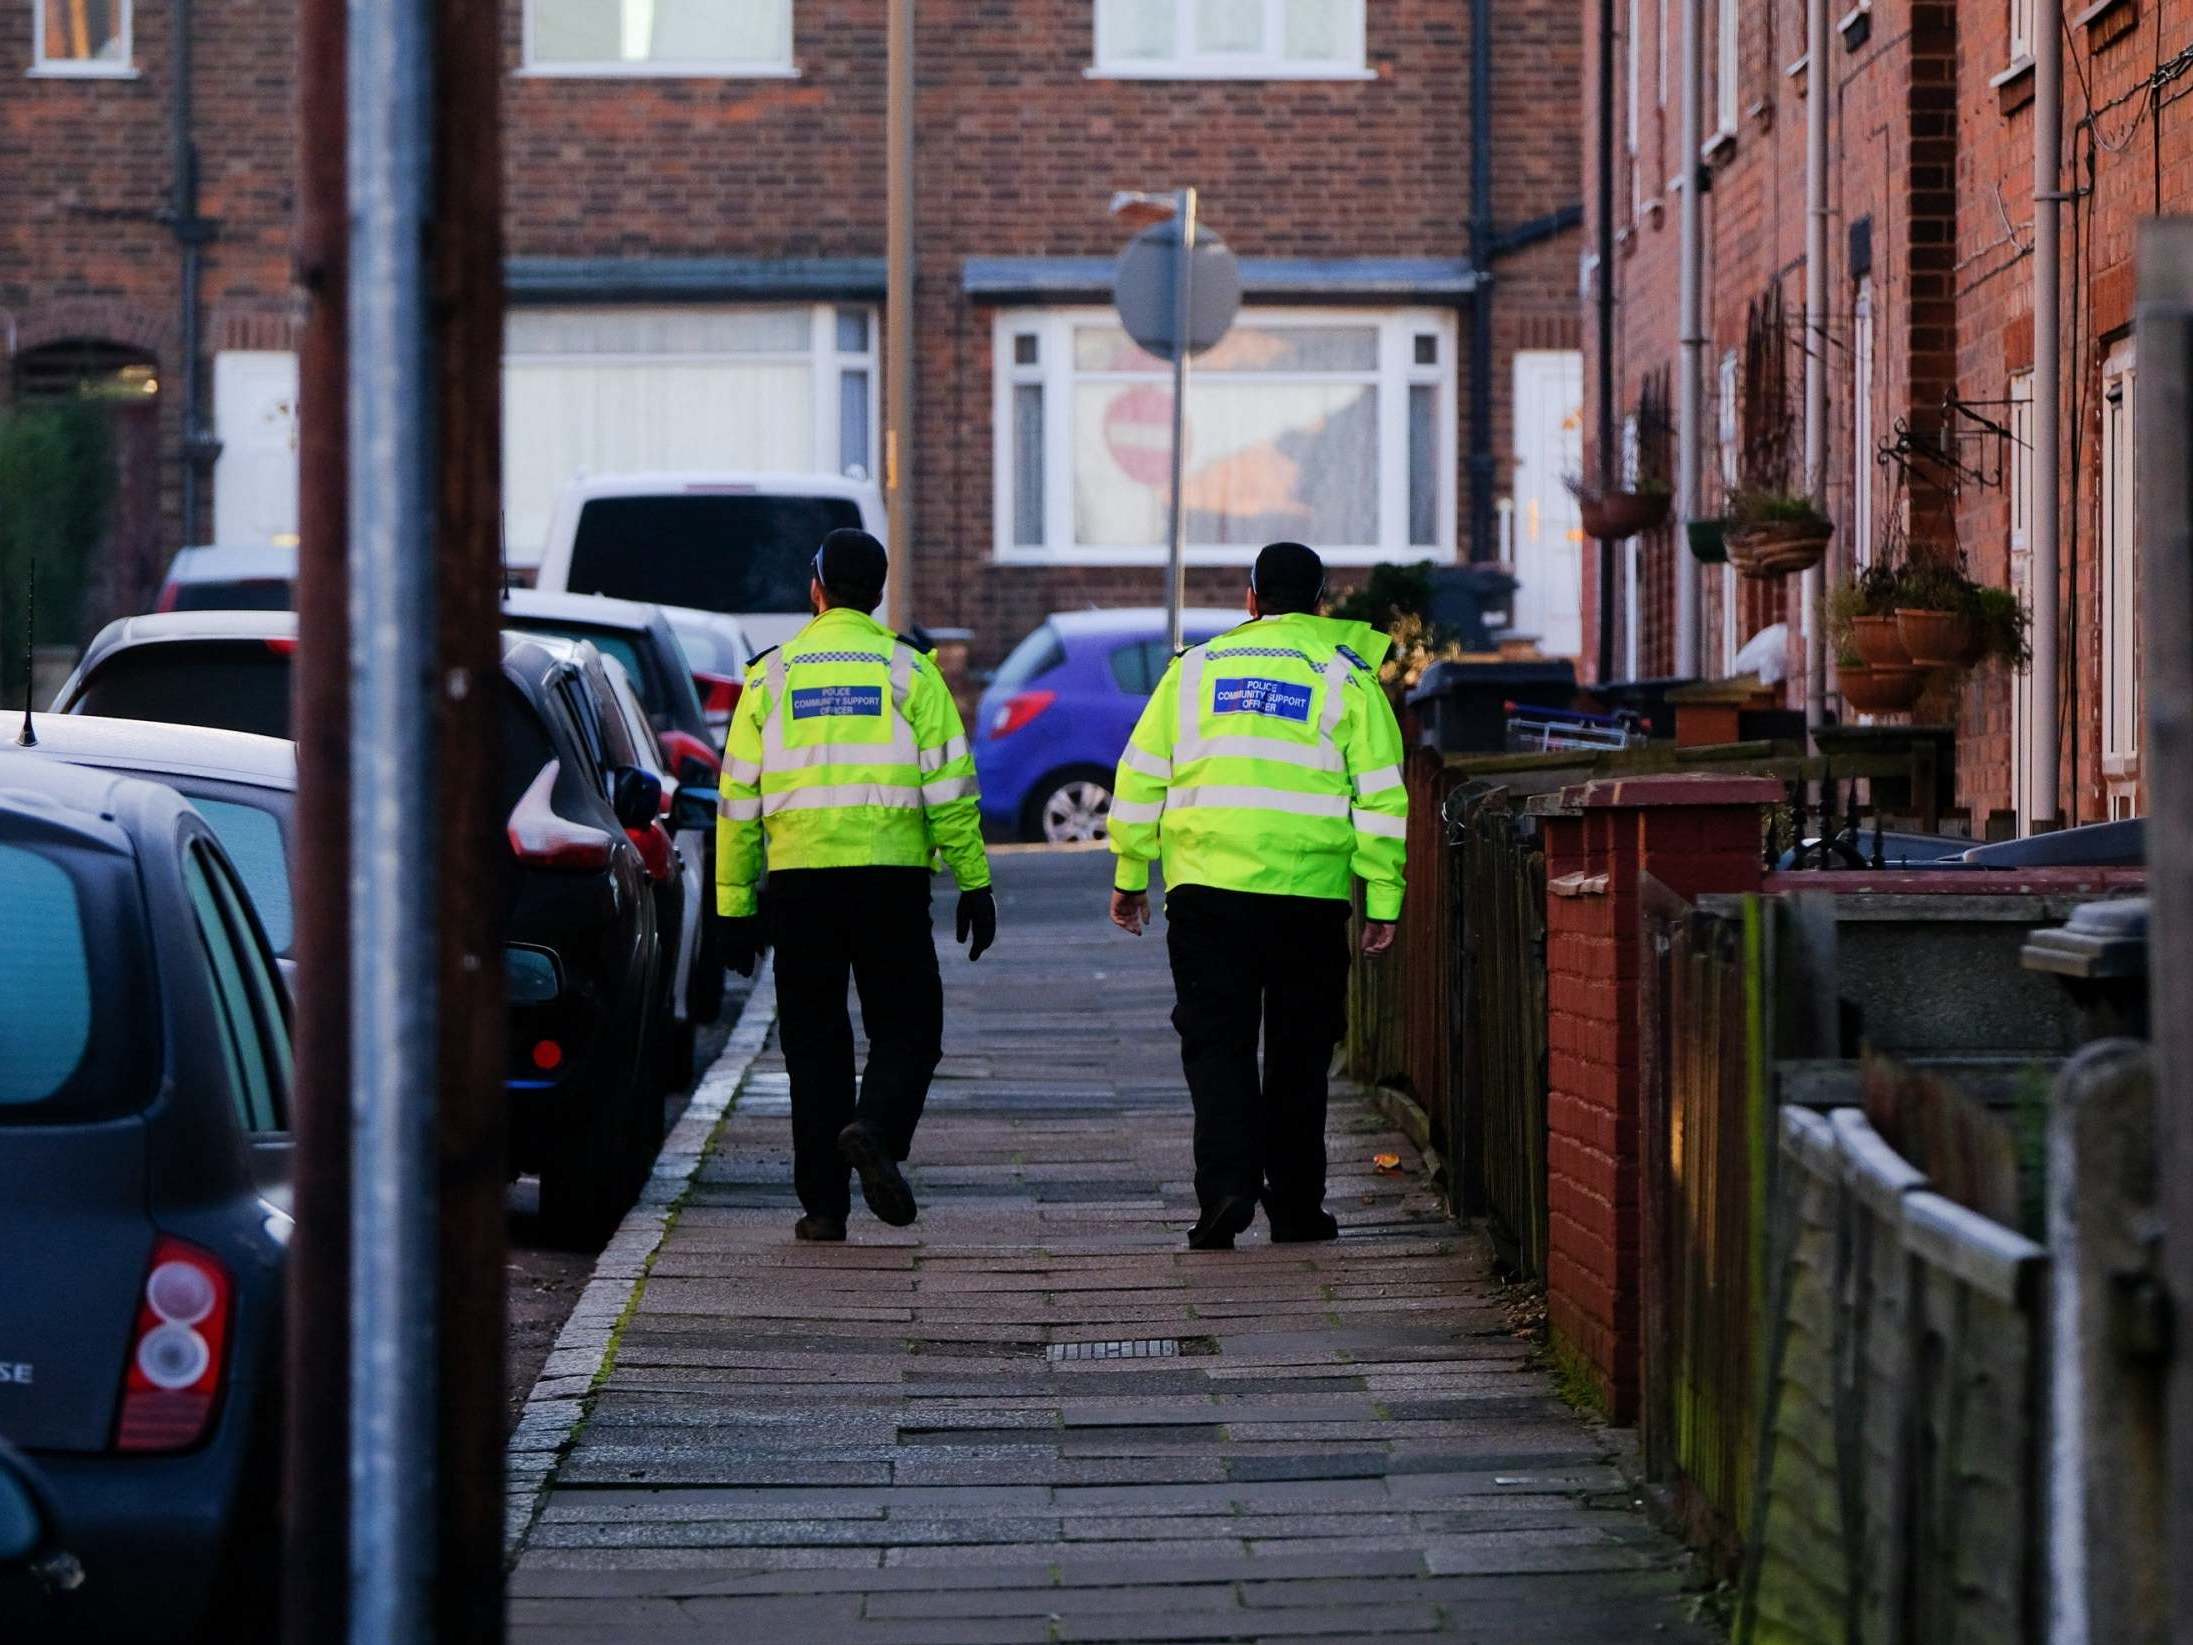 Police patrol Belper Street, in Leicester, where a 10-year-old boy was stabbed by a man in front of his mother on 18 January, 2020.